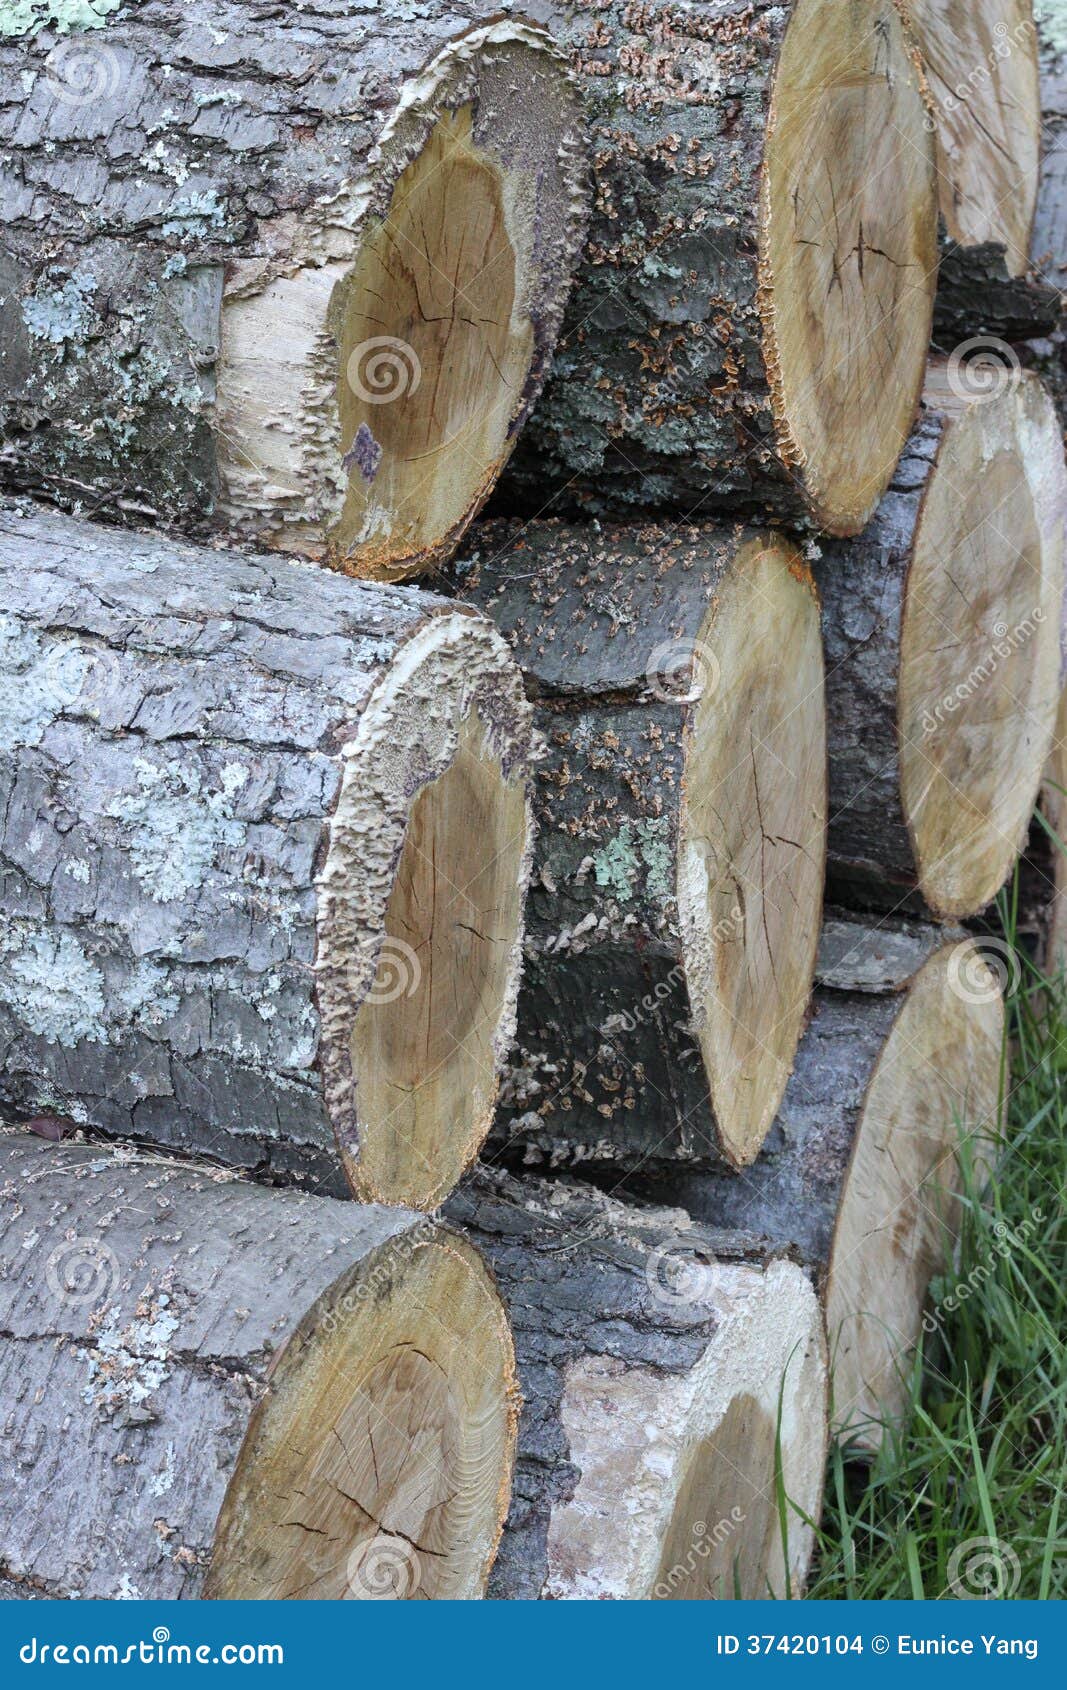 Log piled. Cut wood stacked in a backyard of a farm.